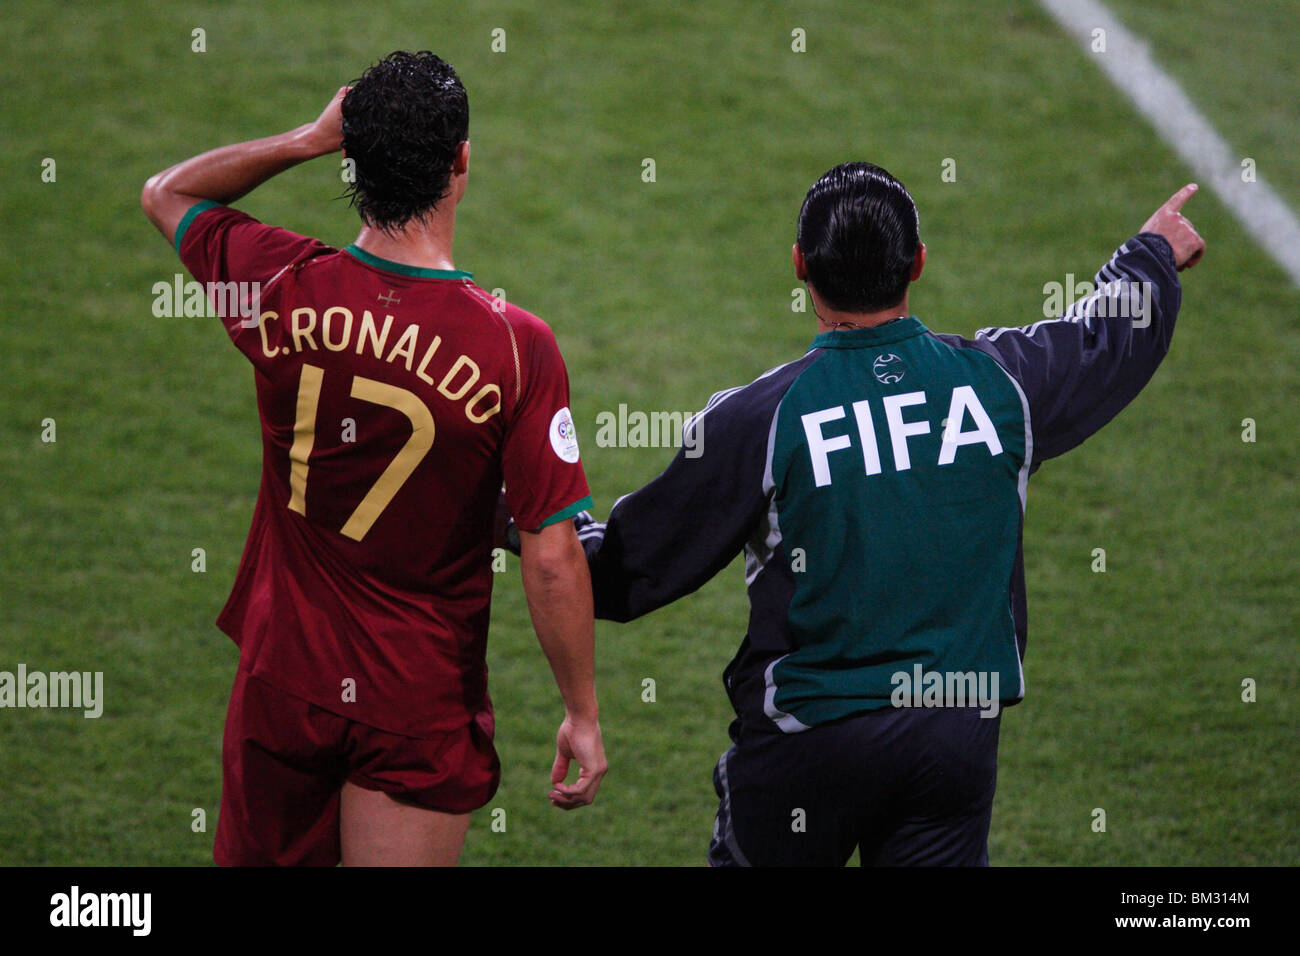 Cristiano Ronaldo of Portugal (l) waits to re-enter a round of 16 2006 World Cup soccer match against the Netherlands. Stock Photo